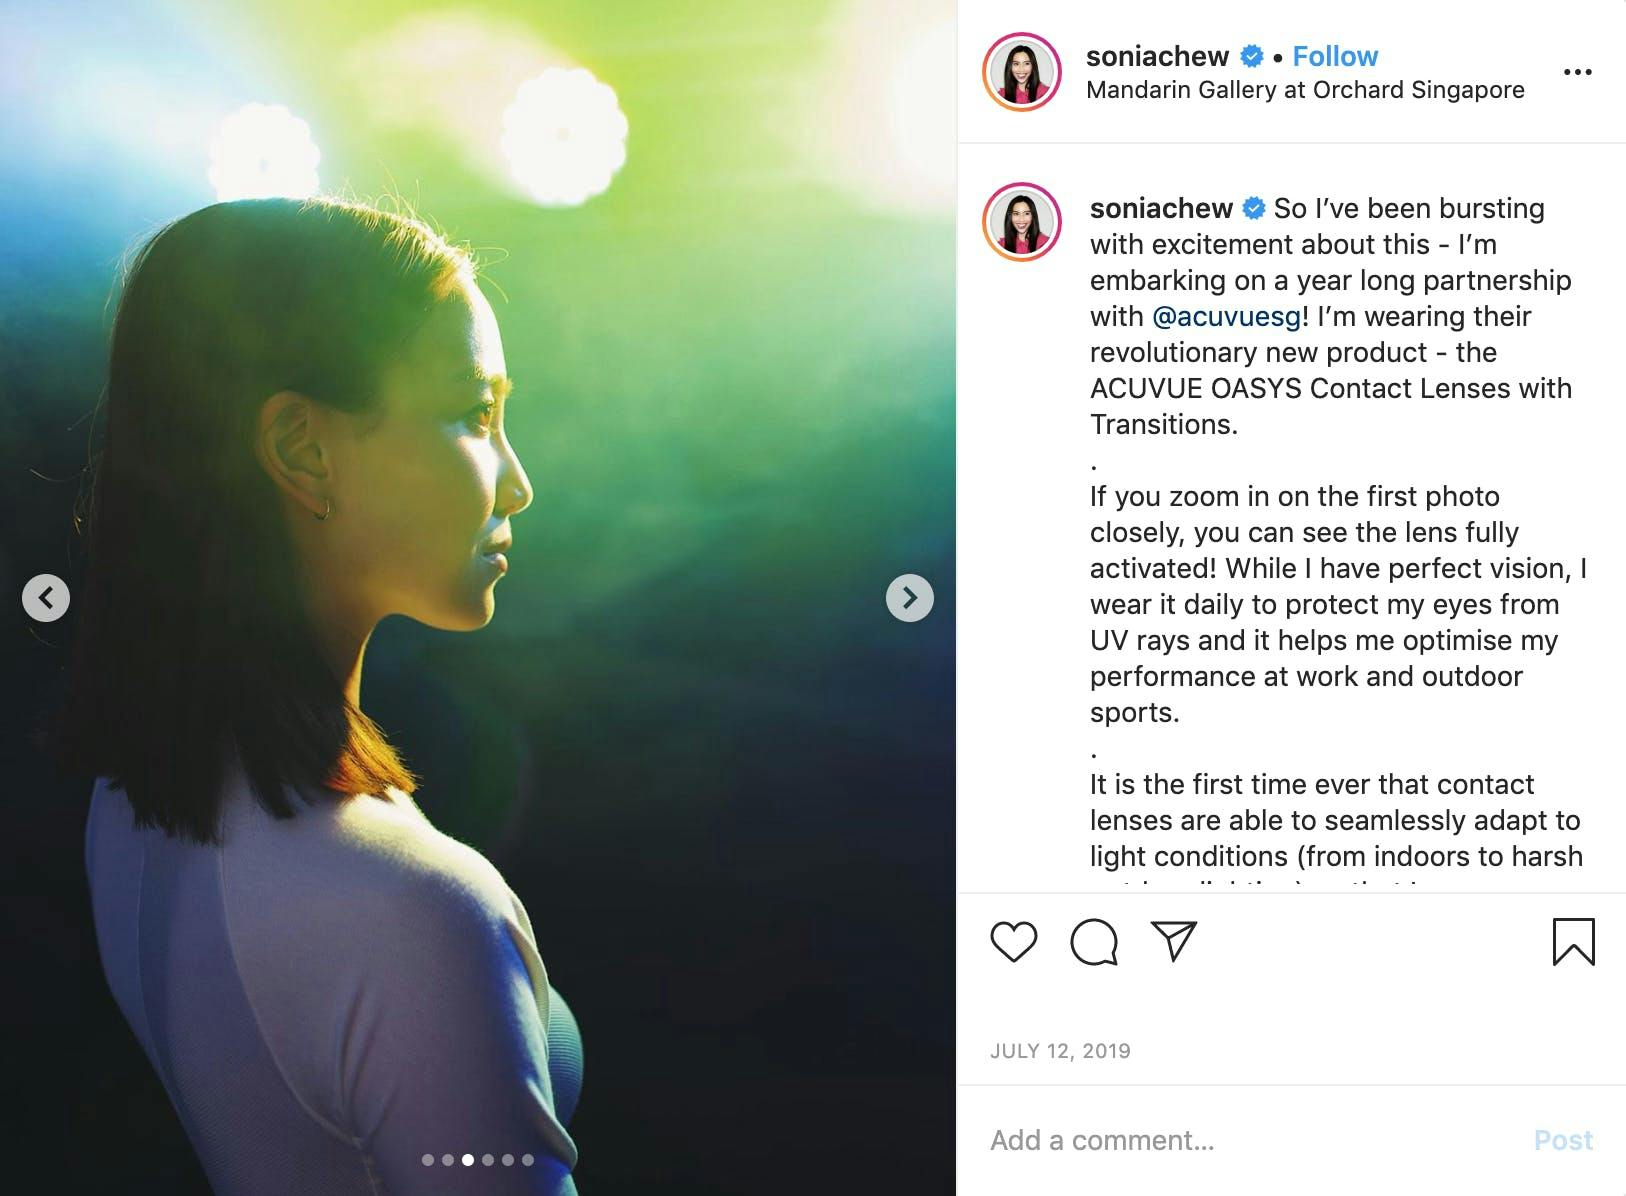 Instagram Post @soniachew announces a year-long branded partnership with Acuvue Signapore